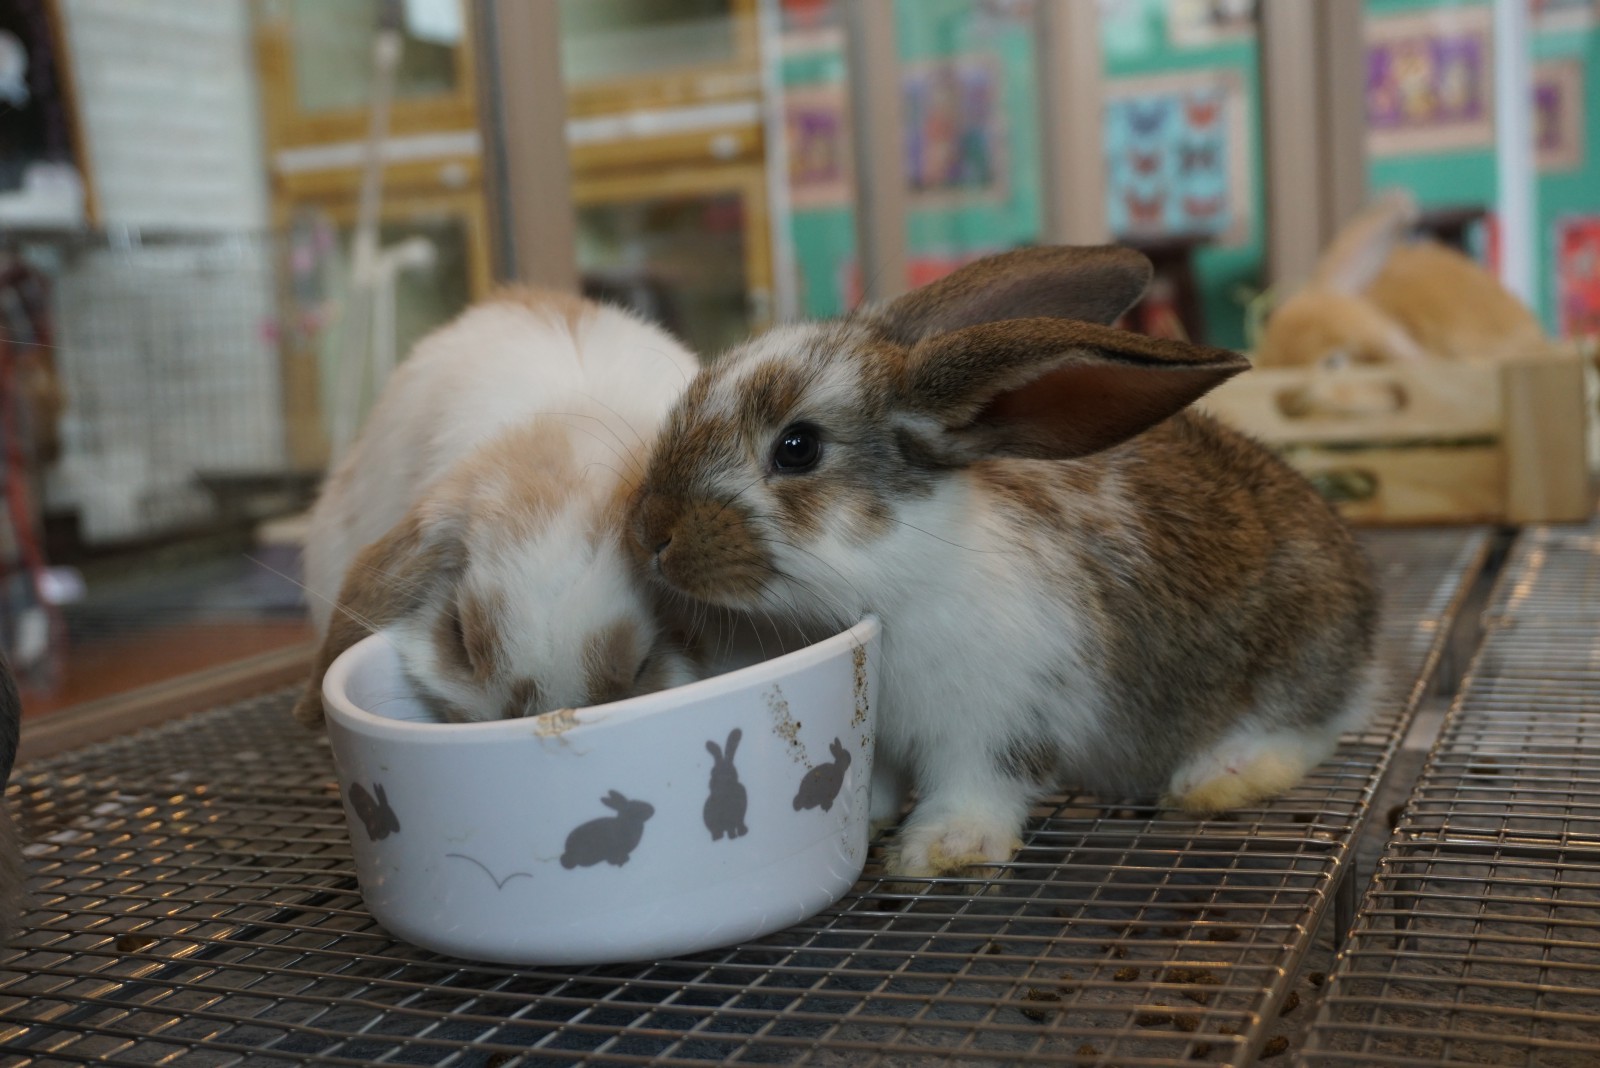 Fluffy bunnies eating their food at Mr Bunny